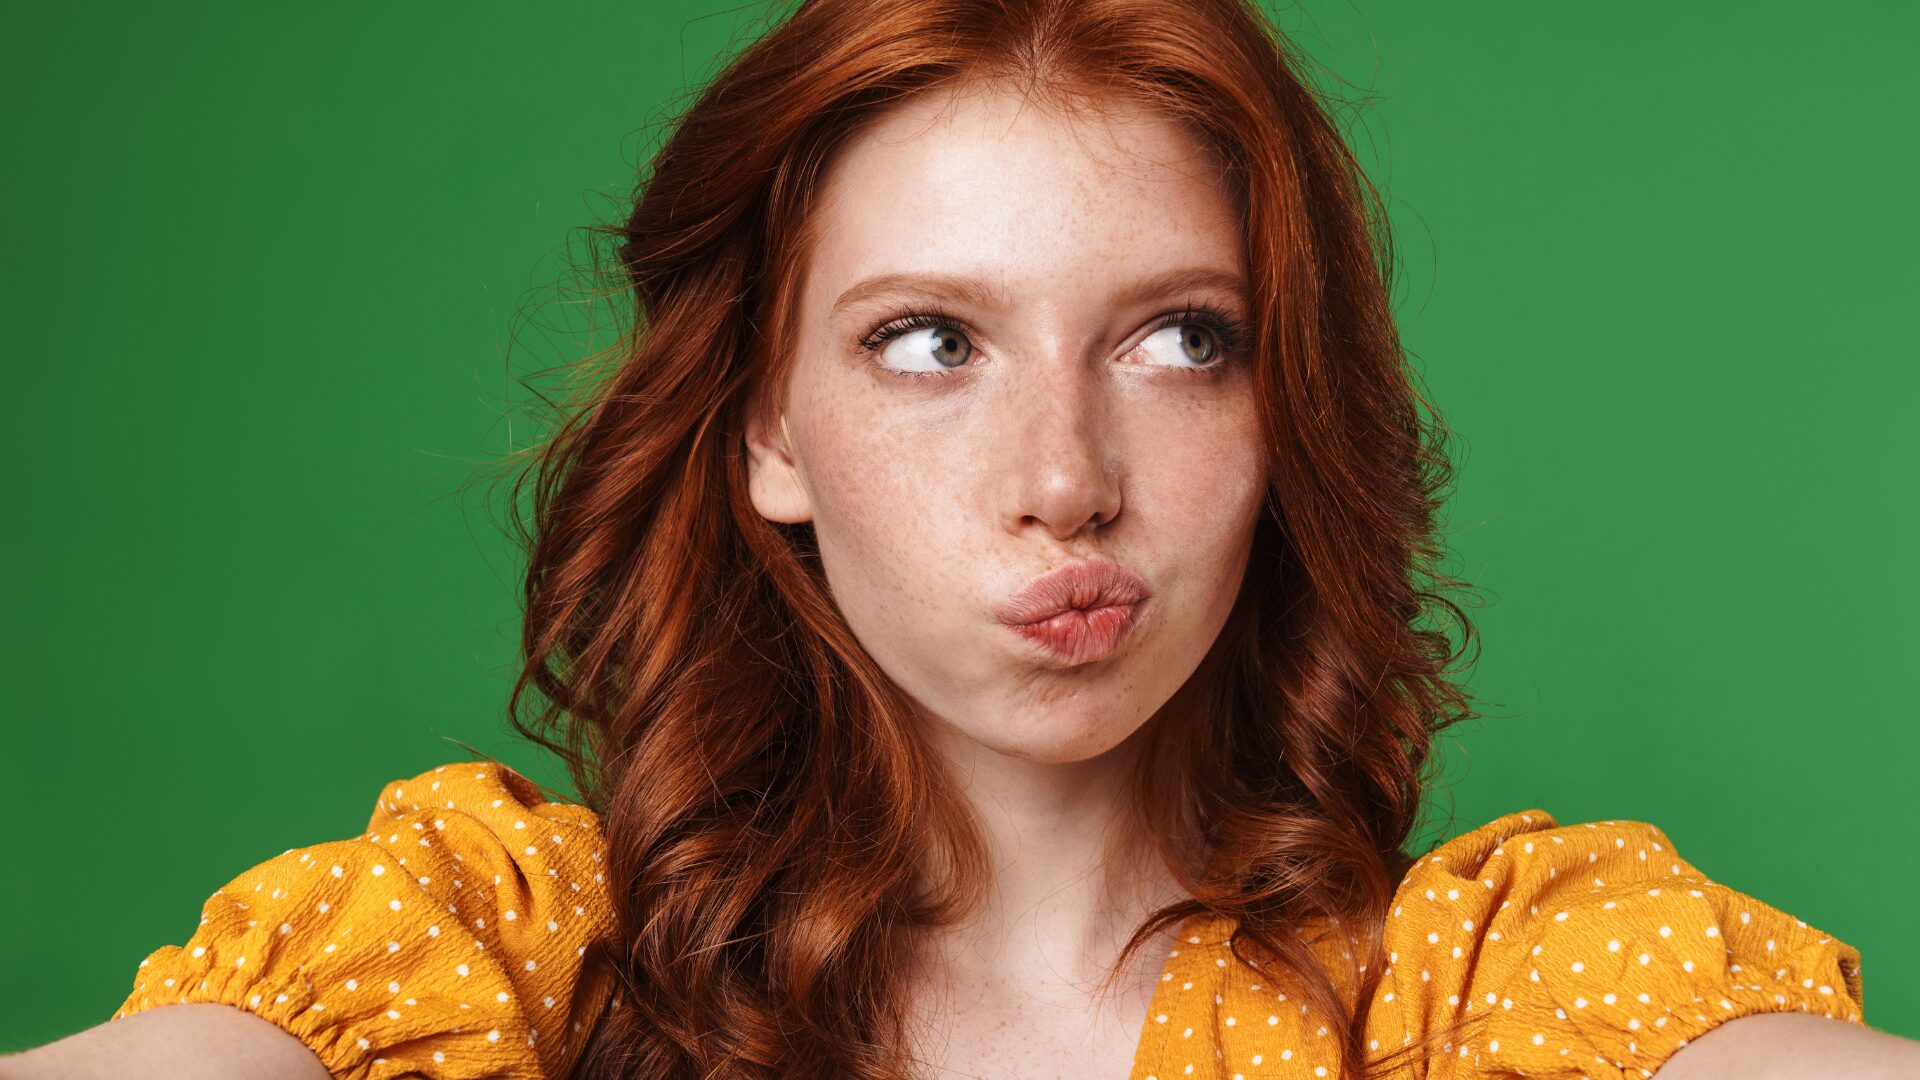 Does Hair Symbolize? How to be a Redhead